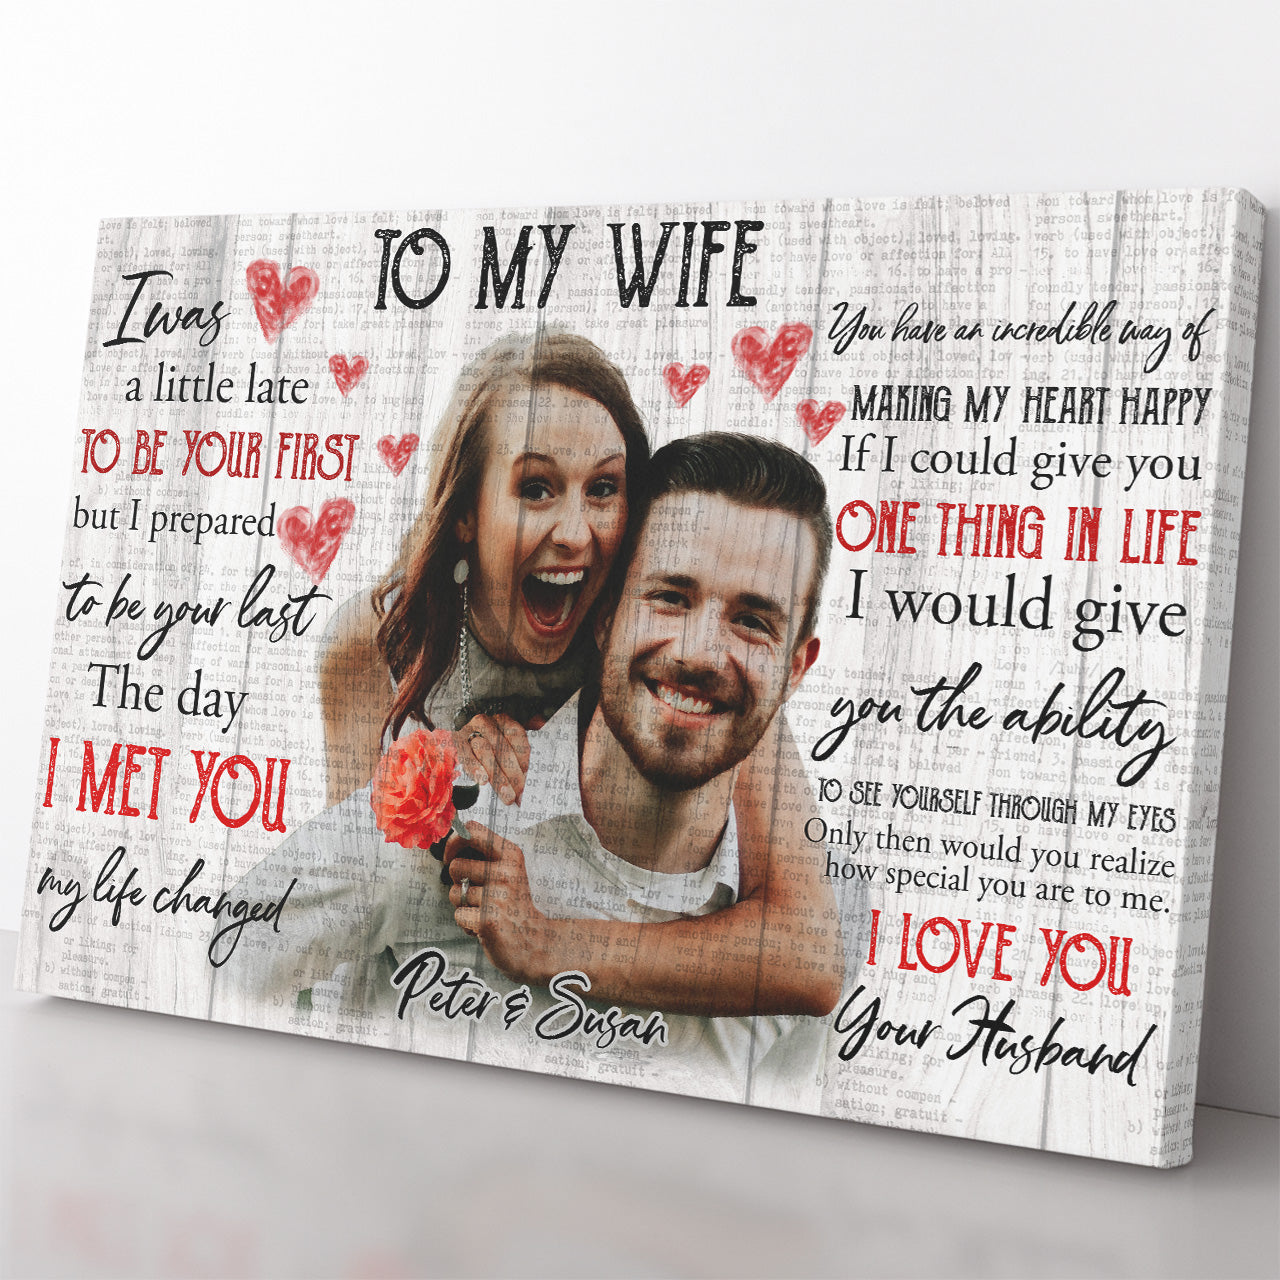 Personalized Canvas Gift Ideas to My Wife, My Life Changed 20121802